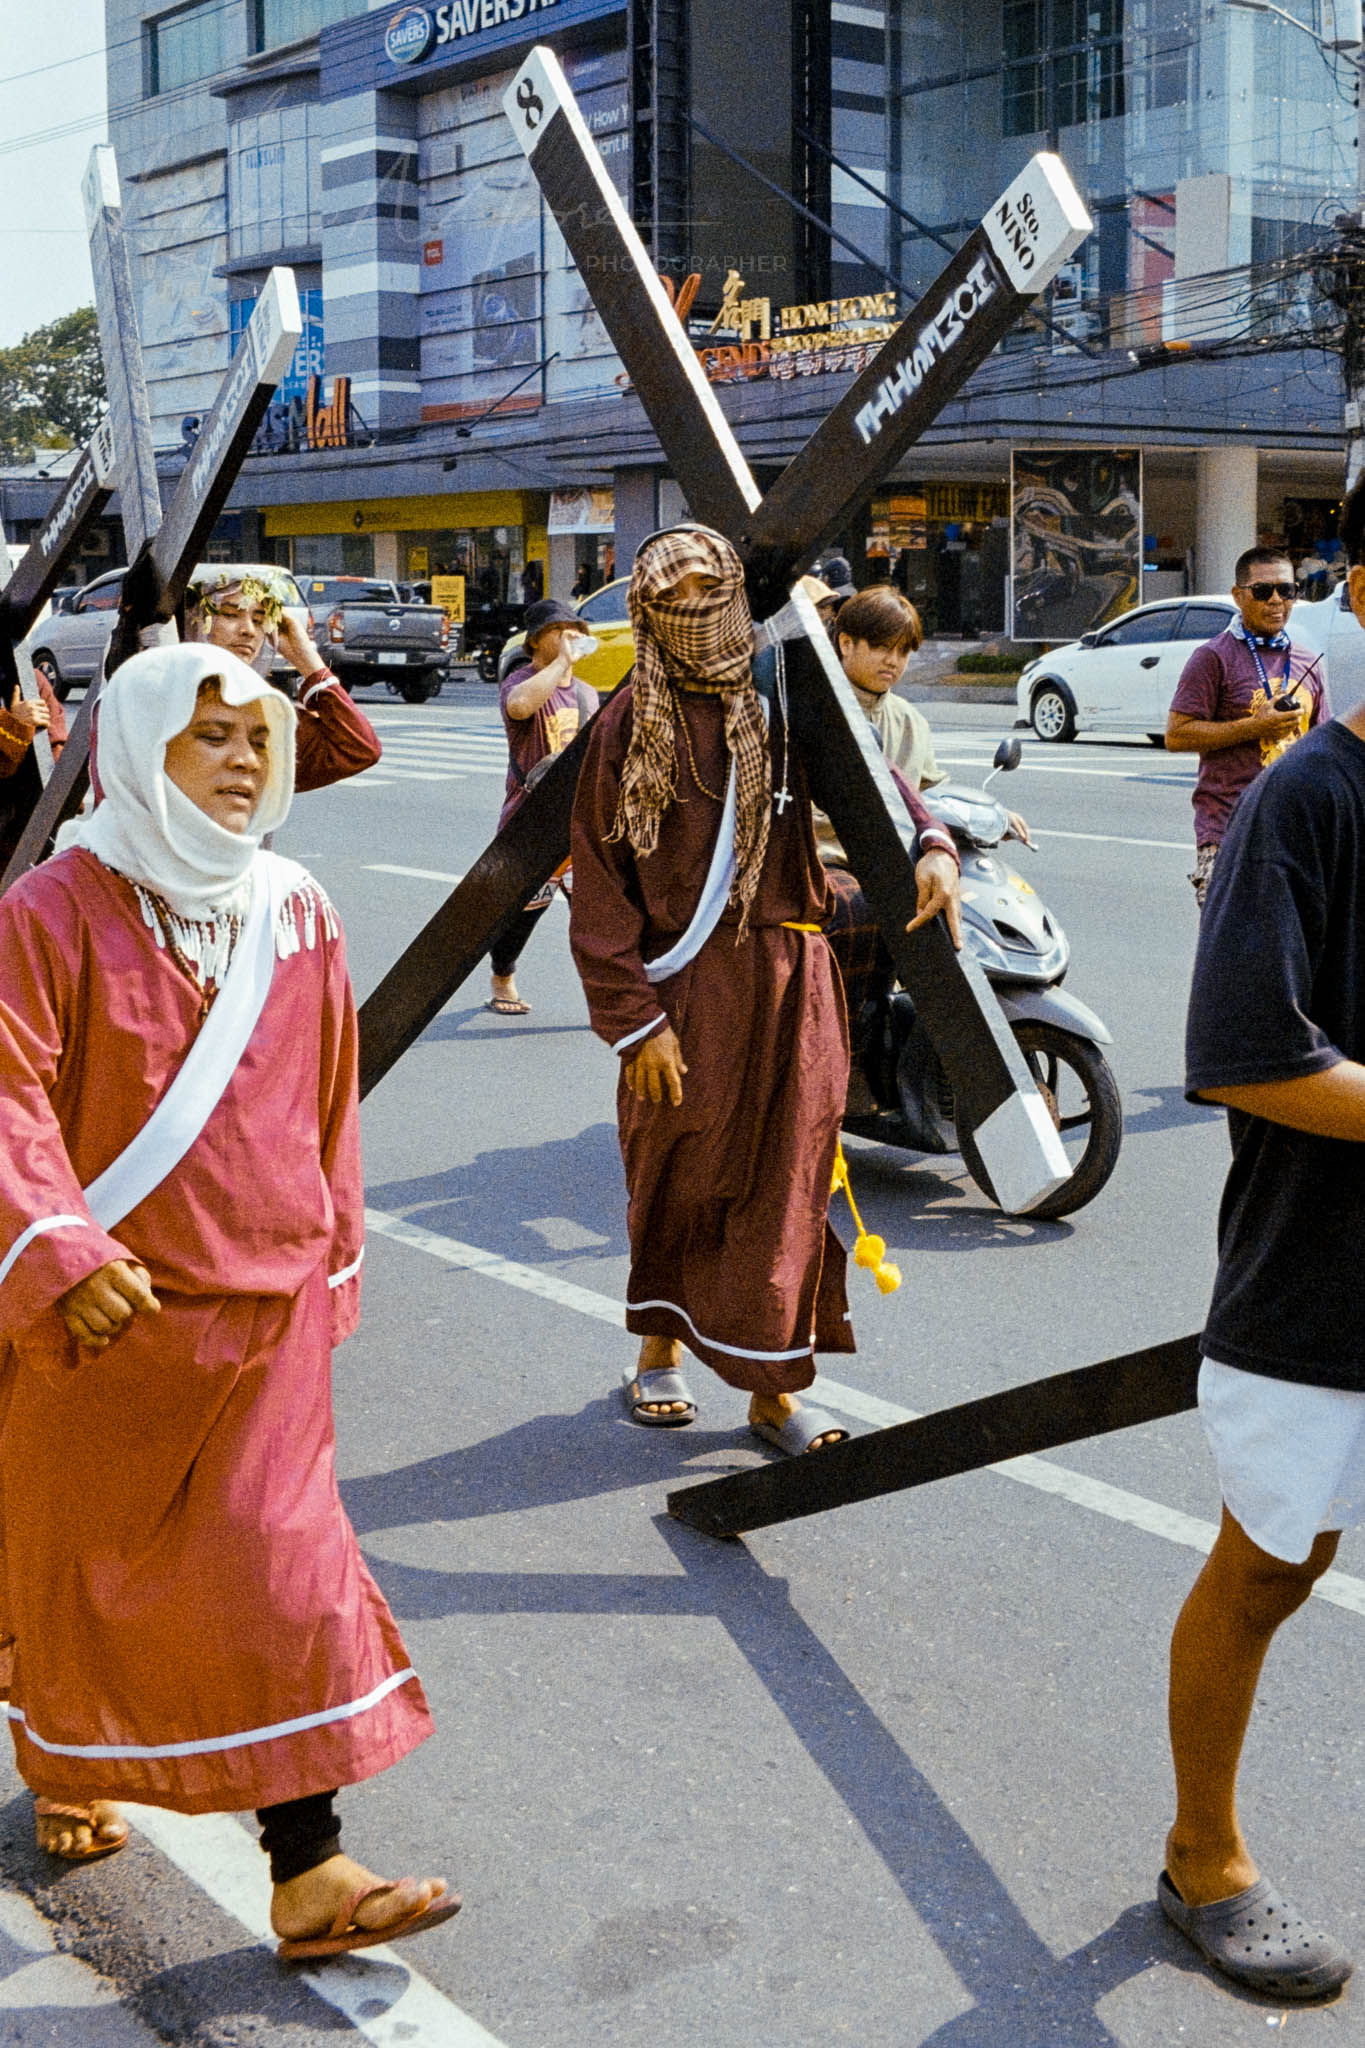 Barefoot participants in traditional attire during a religious procession on a modern city street.